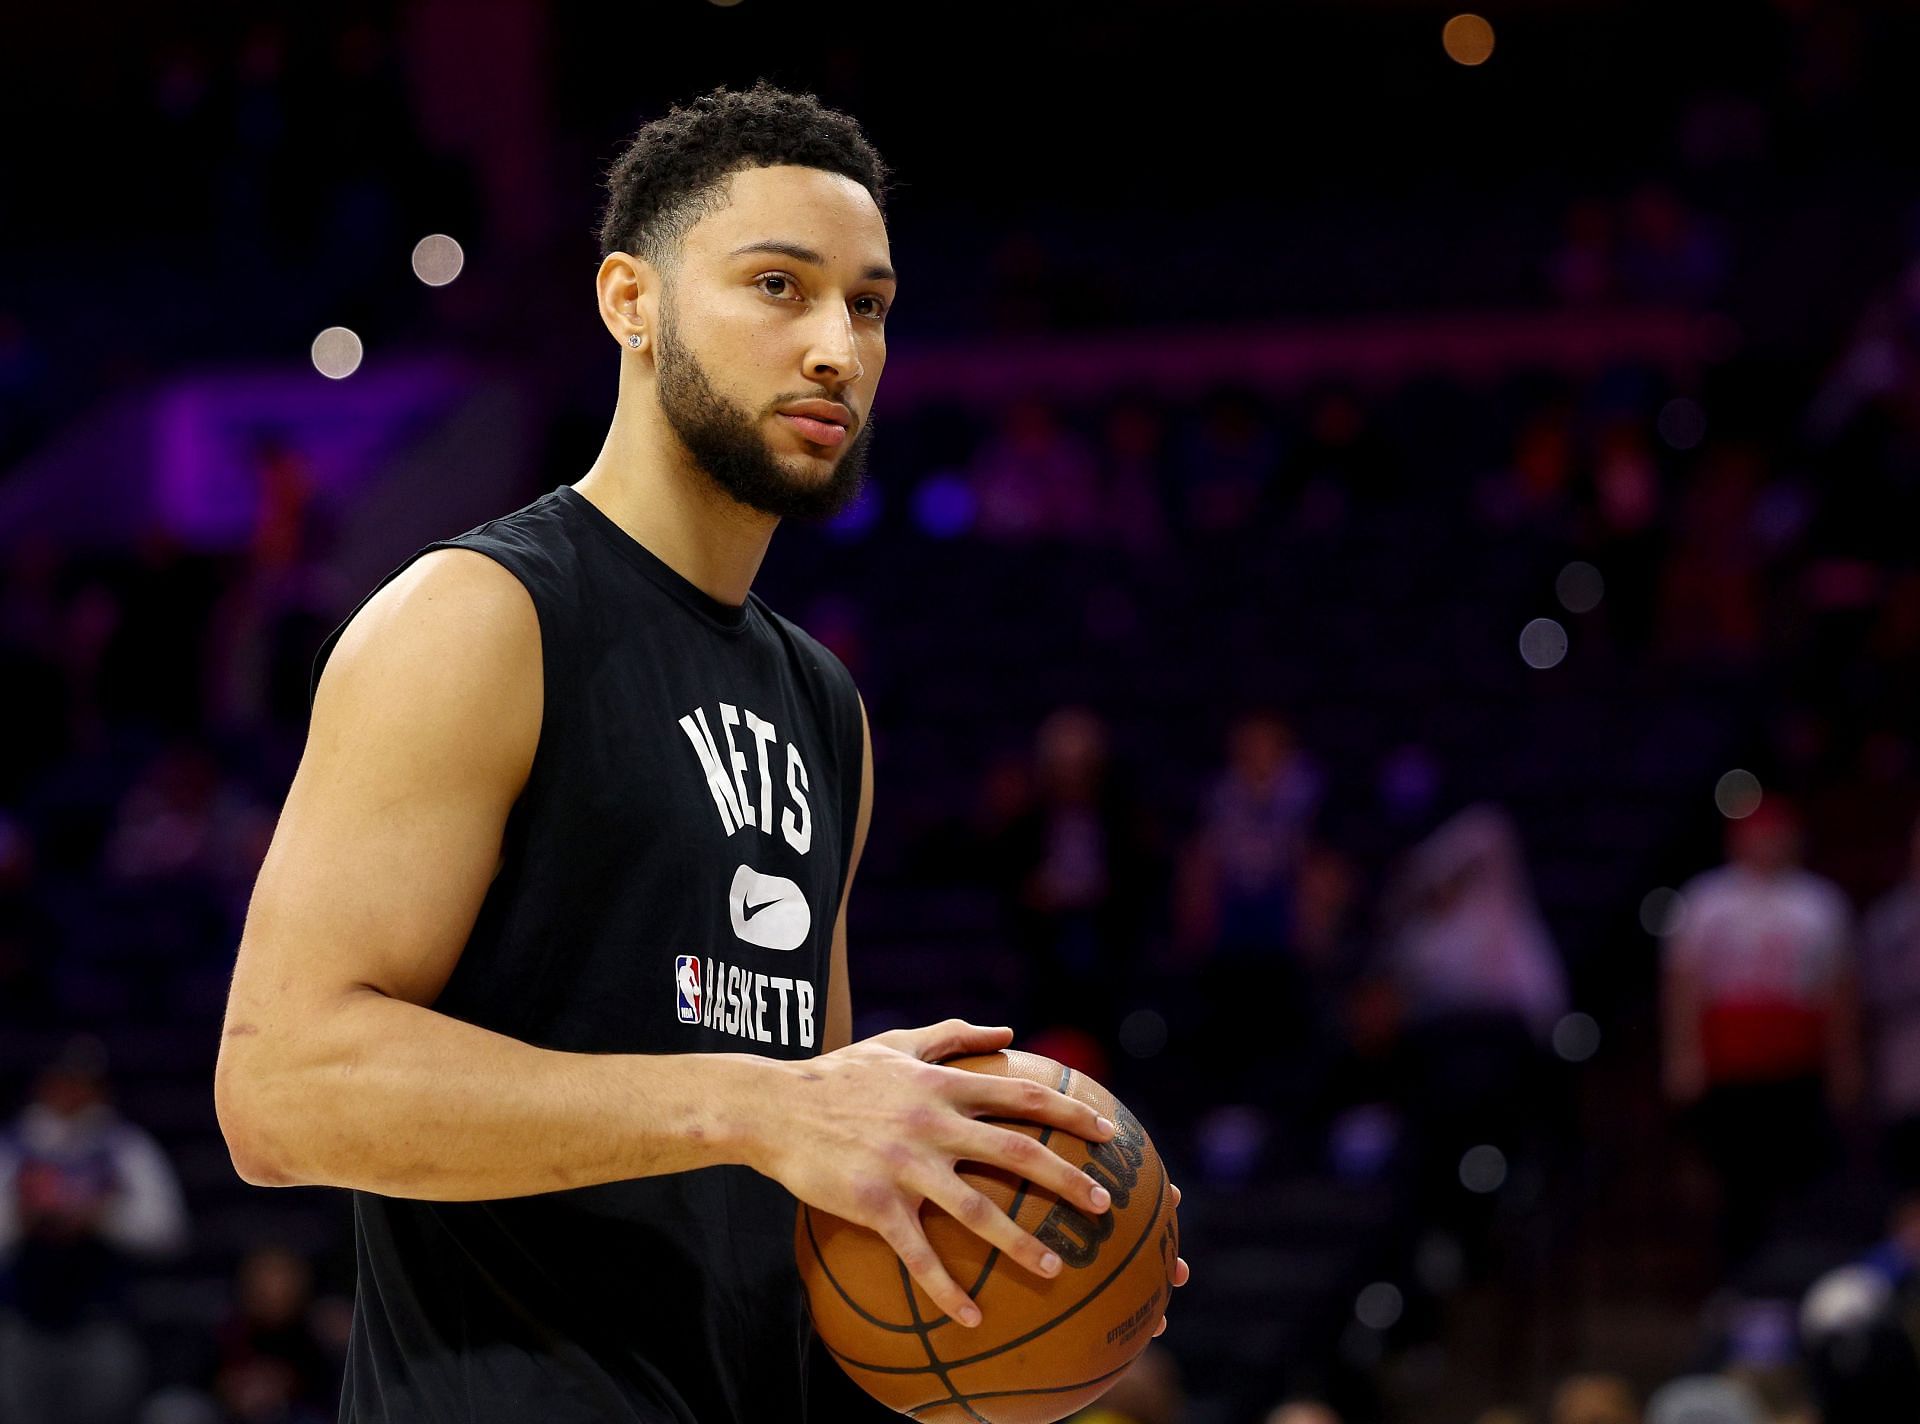 Brooklyn Nets v Philadelphia 76ers; Ben Simmons with team in warm up, still sidelined